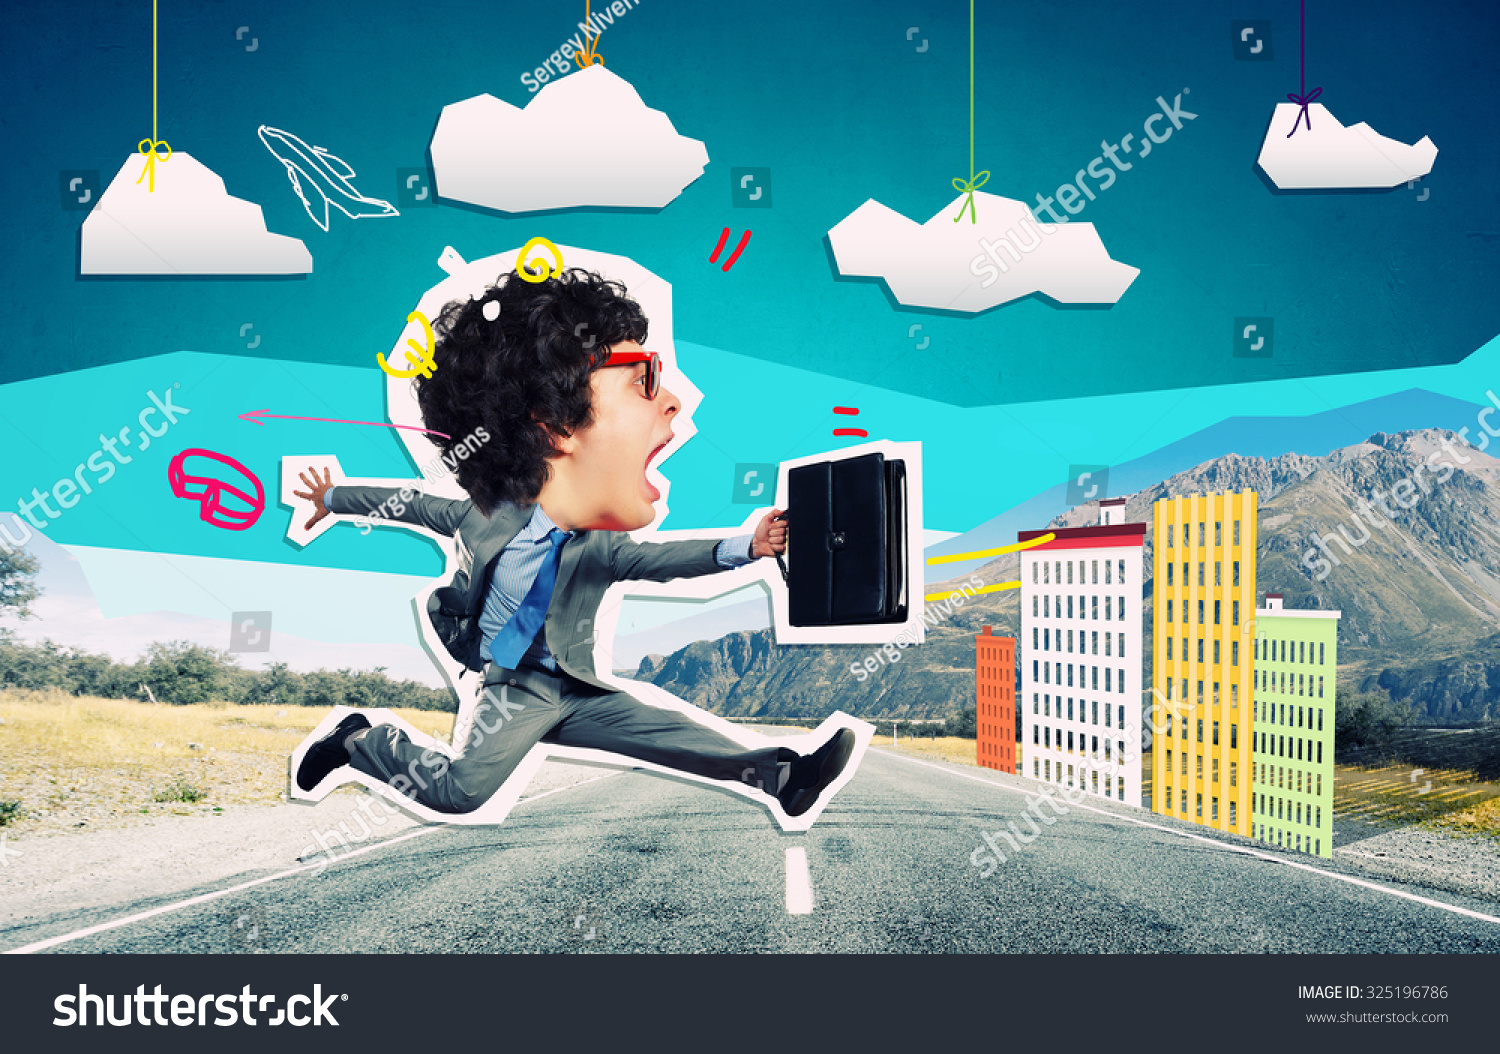 Collage Image Funny Running Businessman Suitcase Stock Photo 325196786 ...